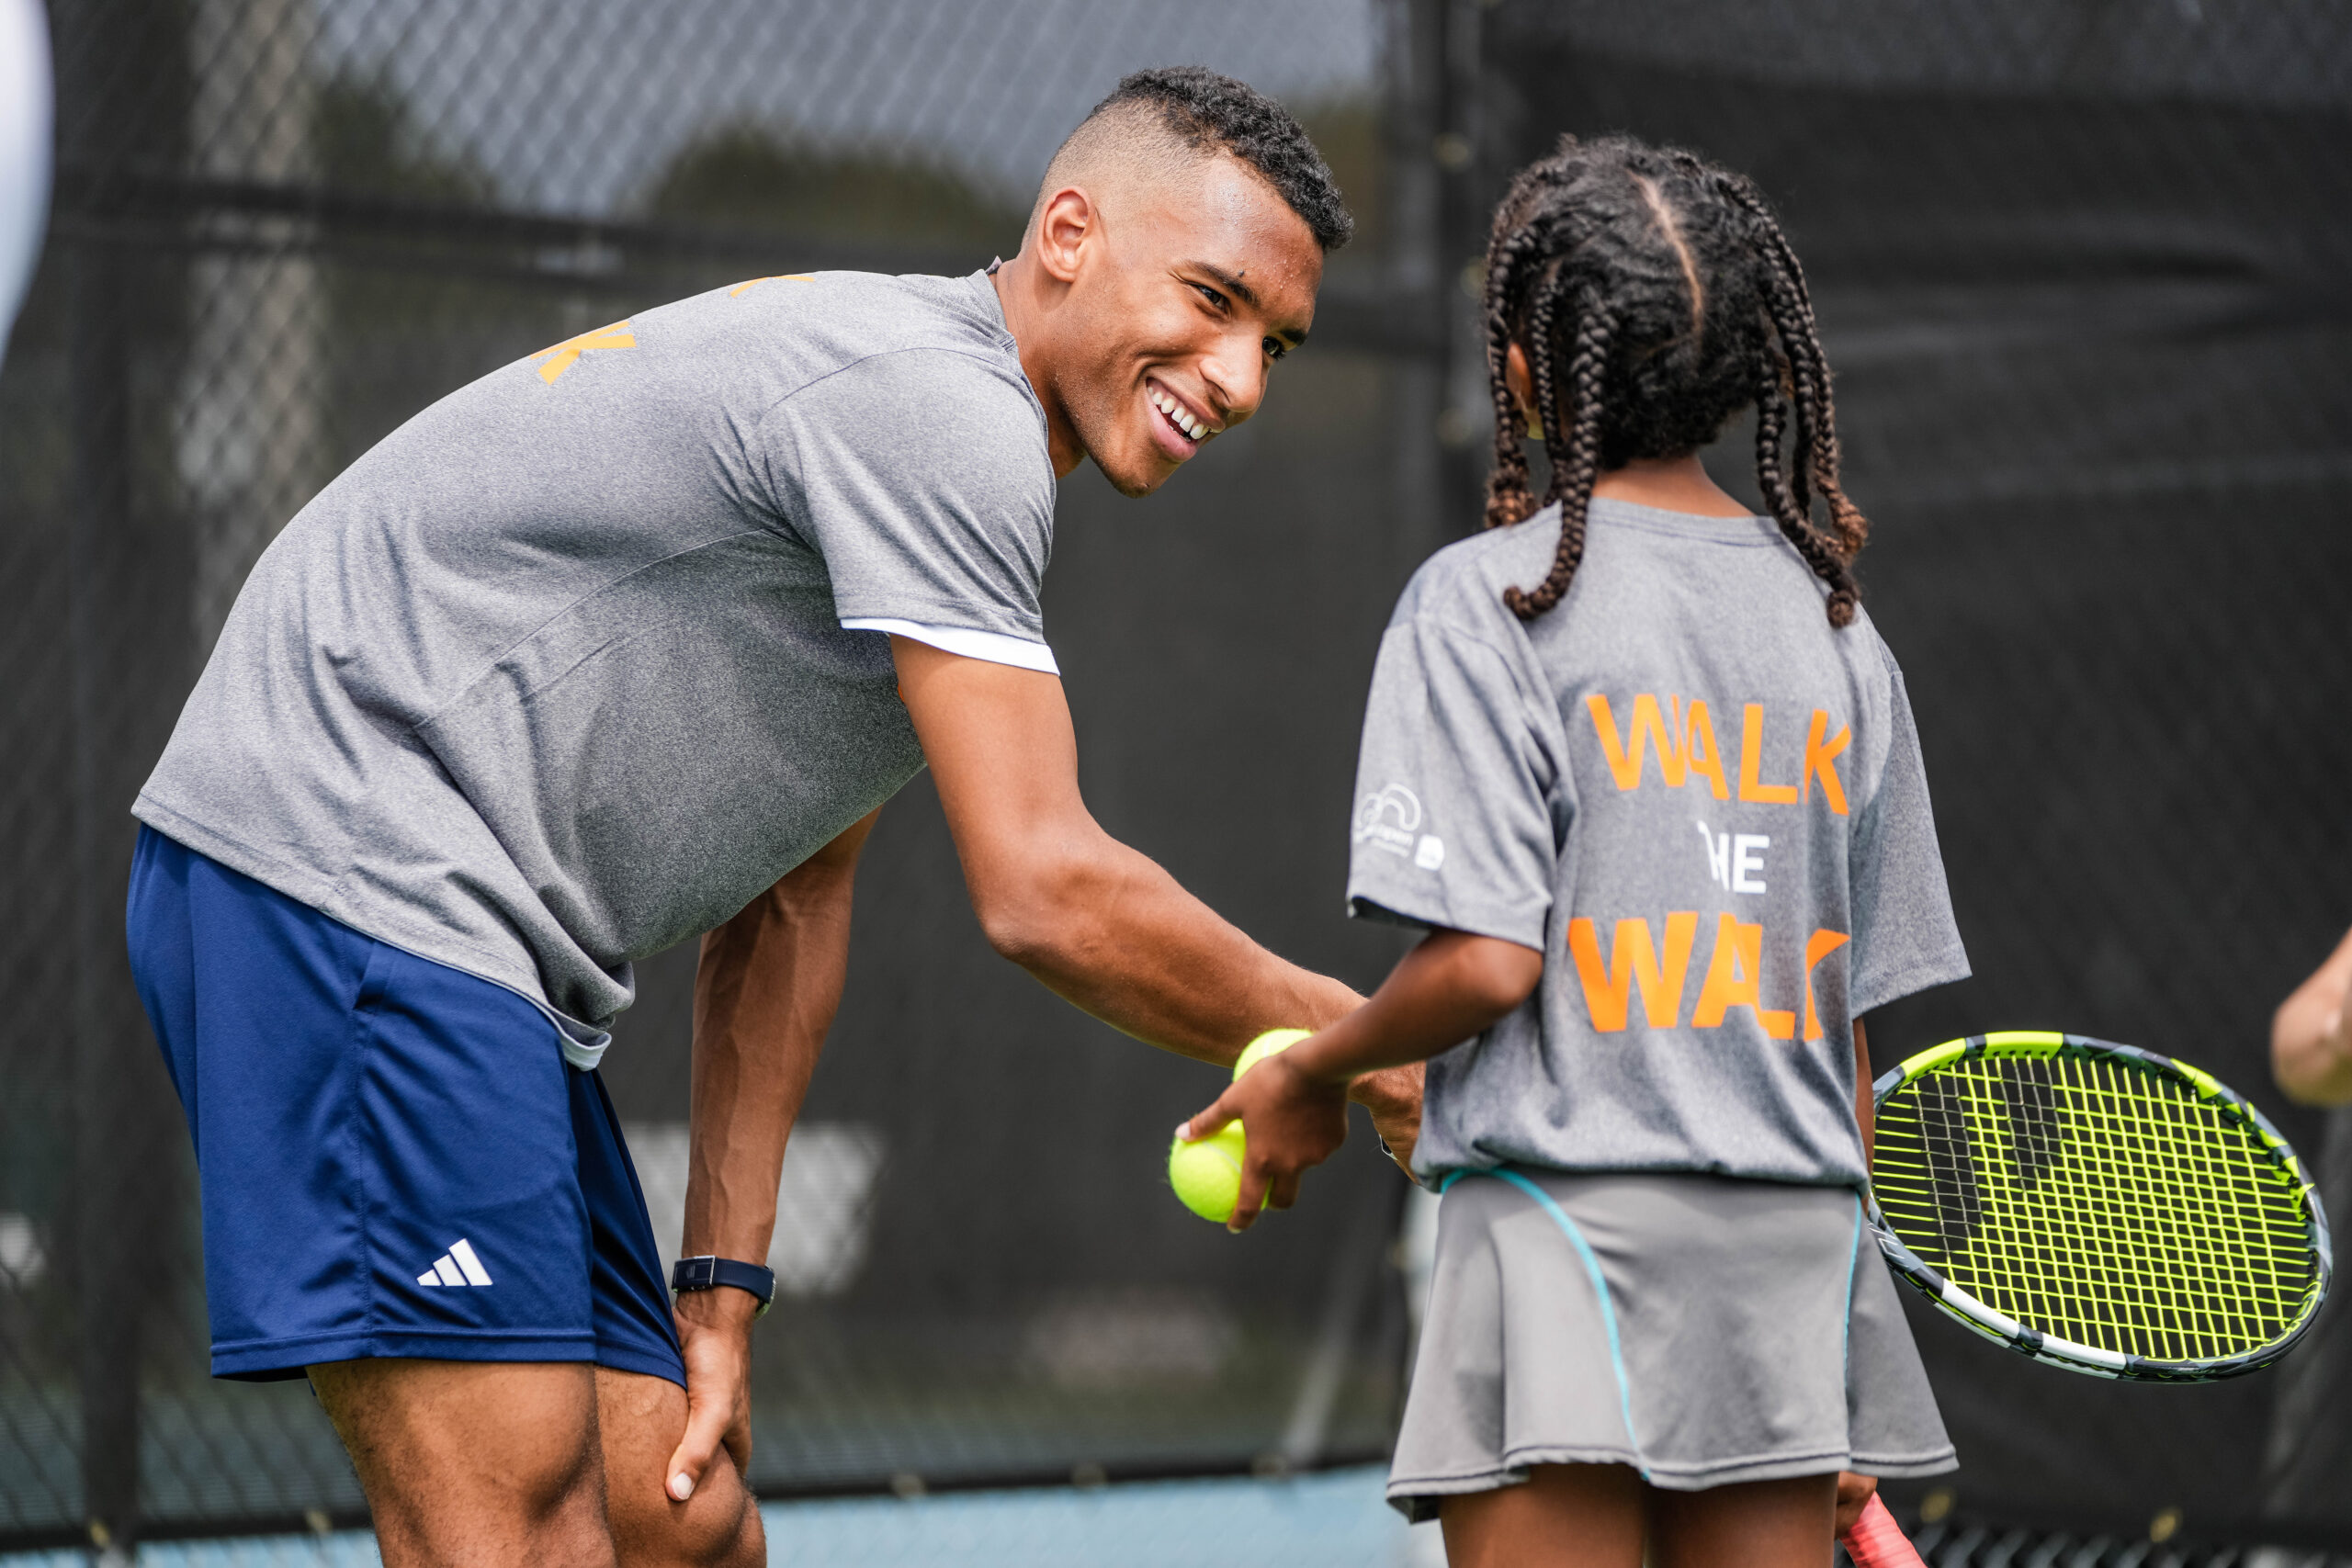 Felix Auger-Aliassiime has fun and smiles with a young participant of the tennis clinic during the Big Brothers, Big Sisters event at Moore Park in Miami on March 20, 2023.